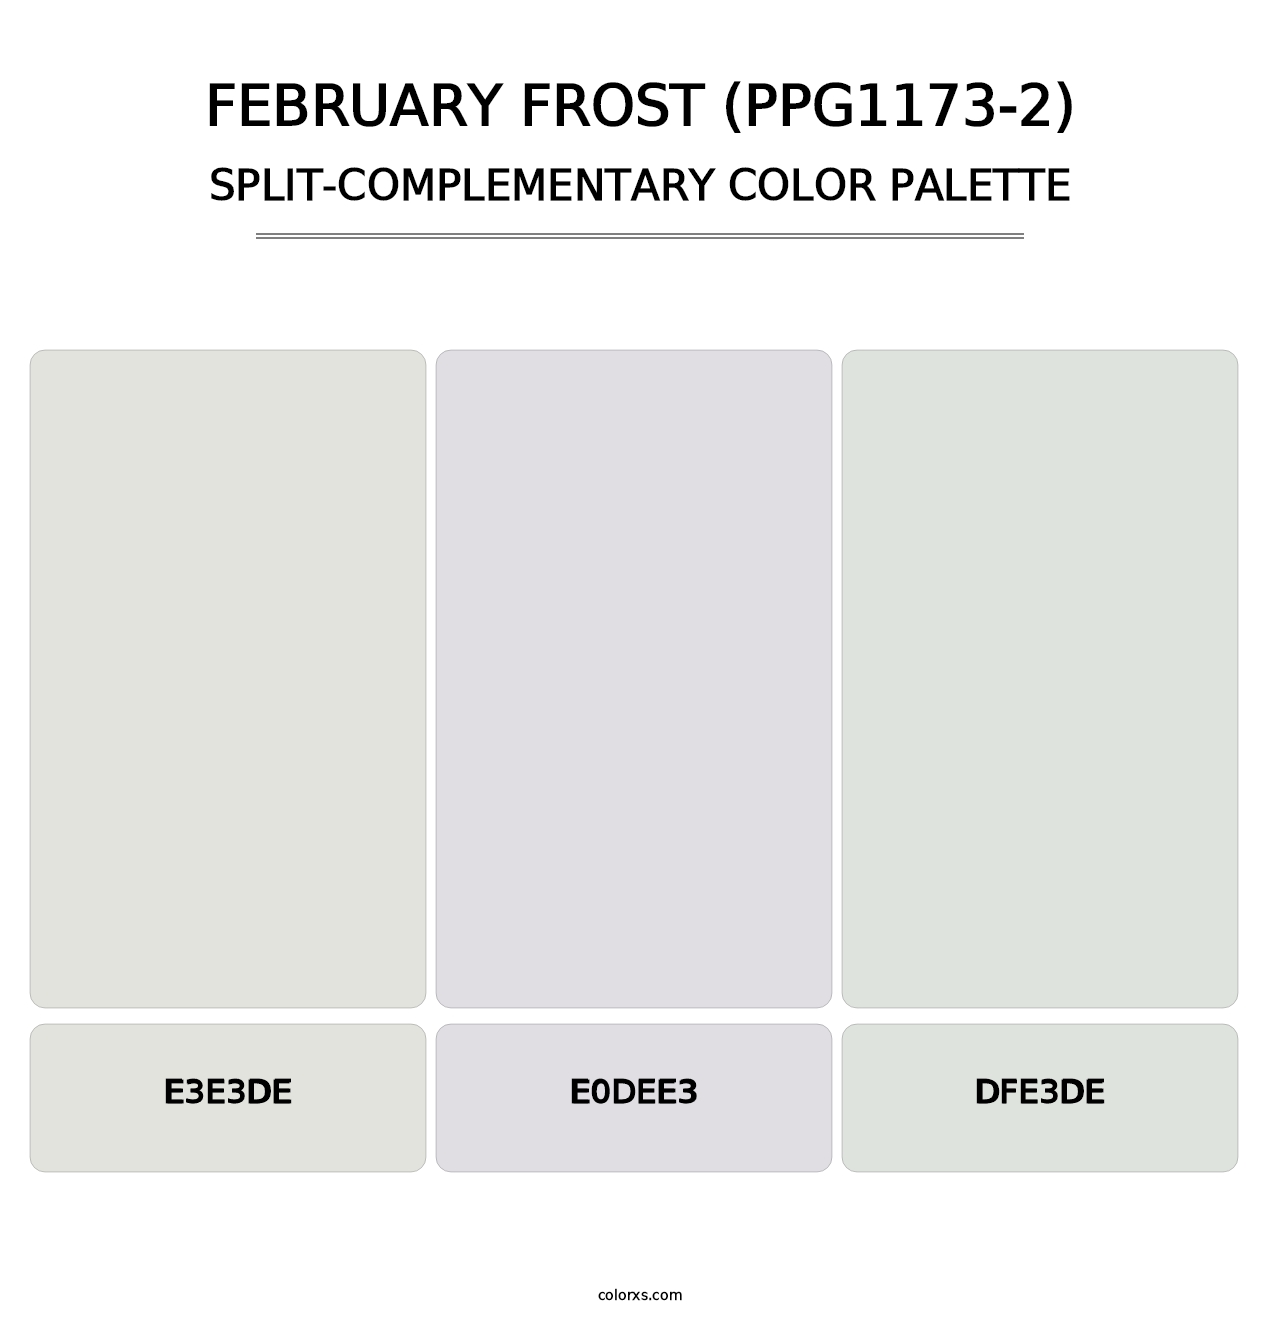 February Frost (PPG1173-2) - Split-Complementary Color Palette